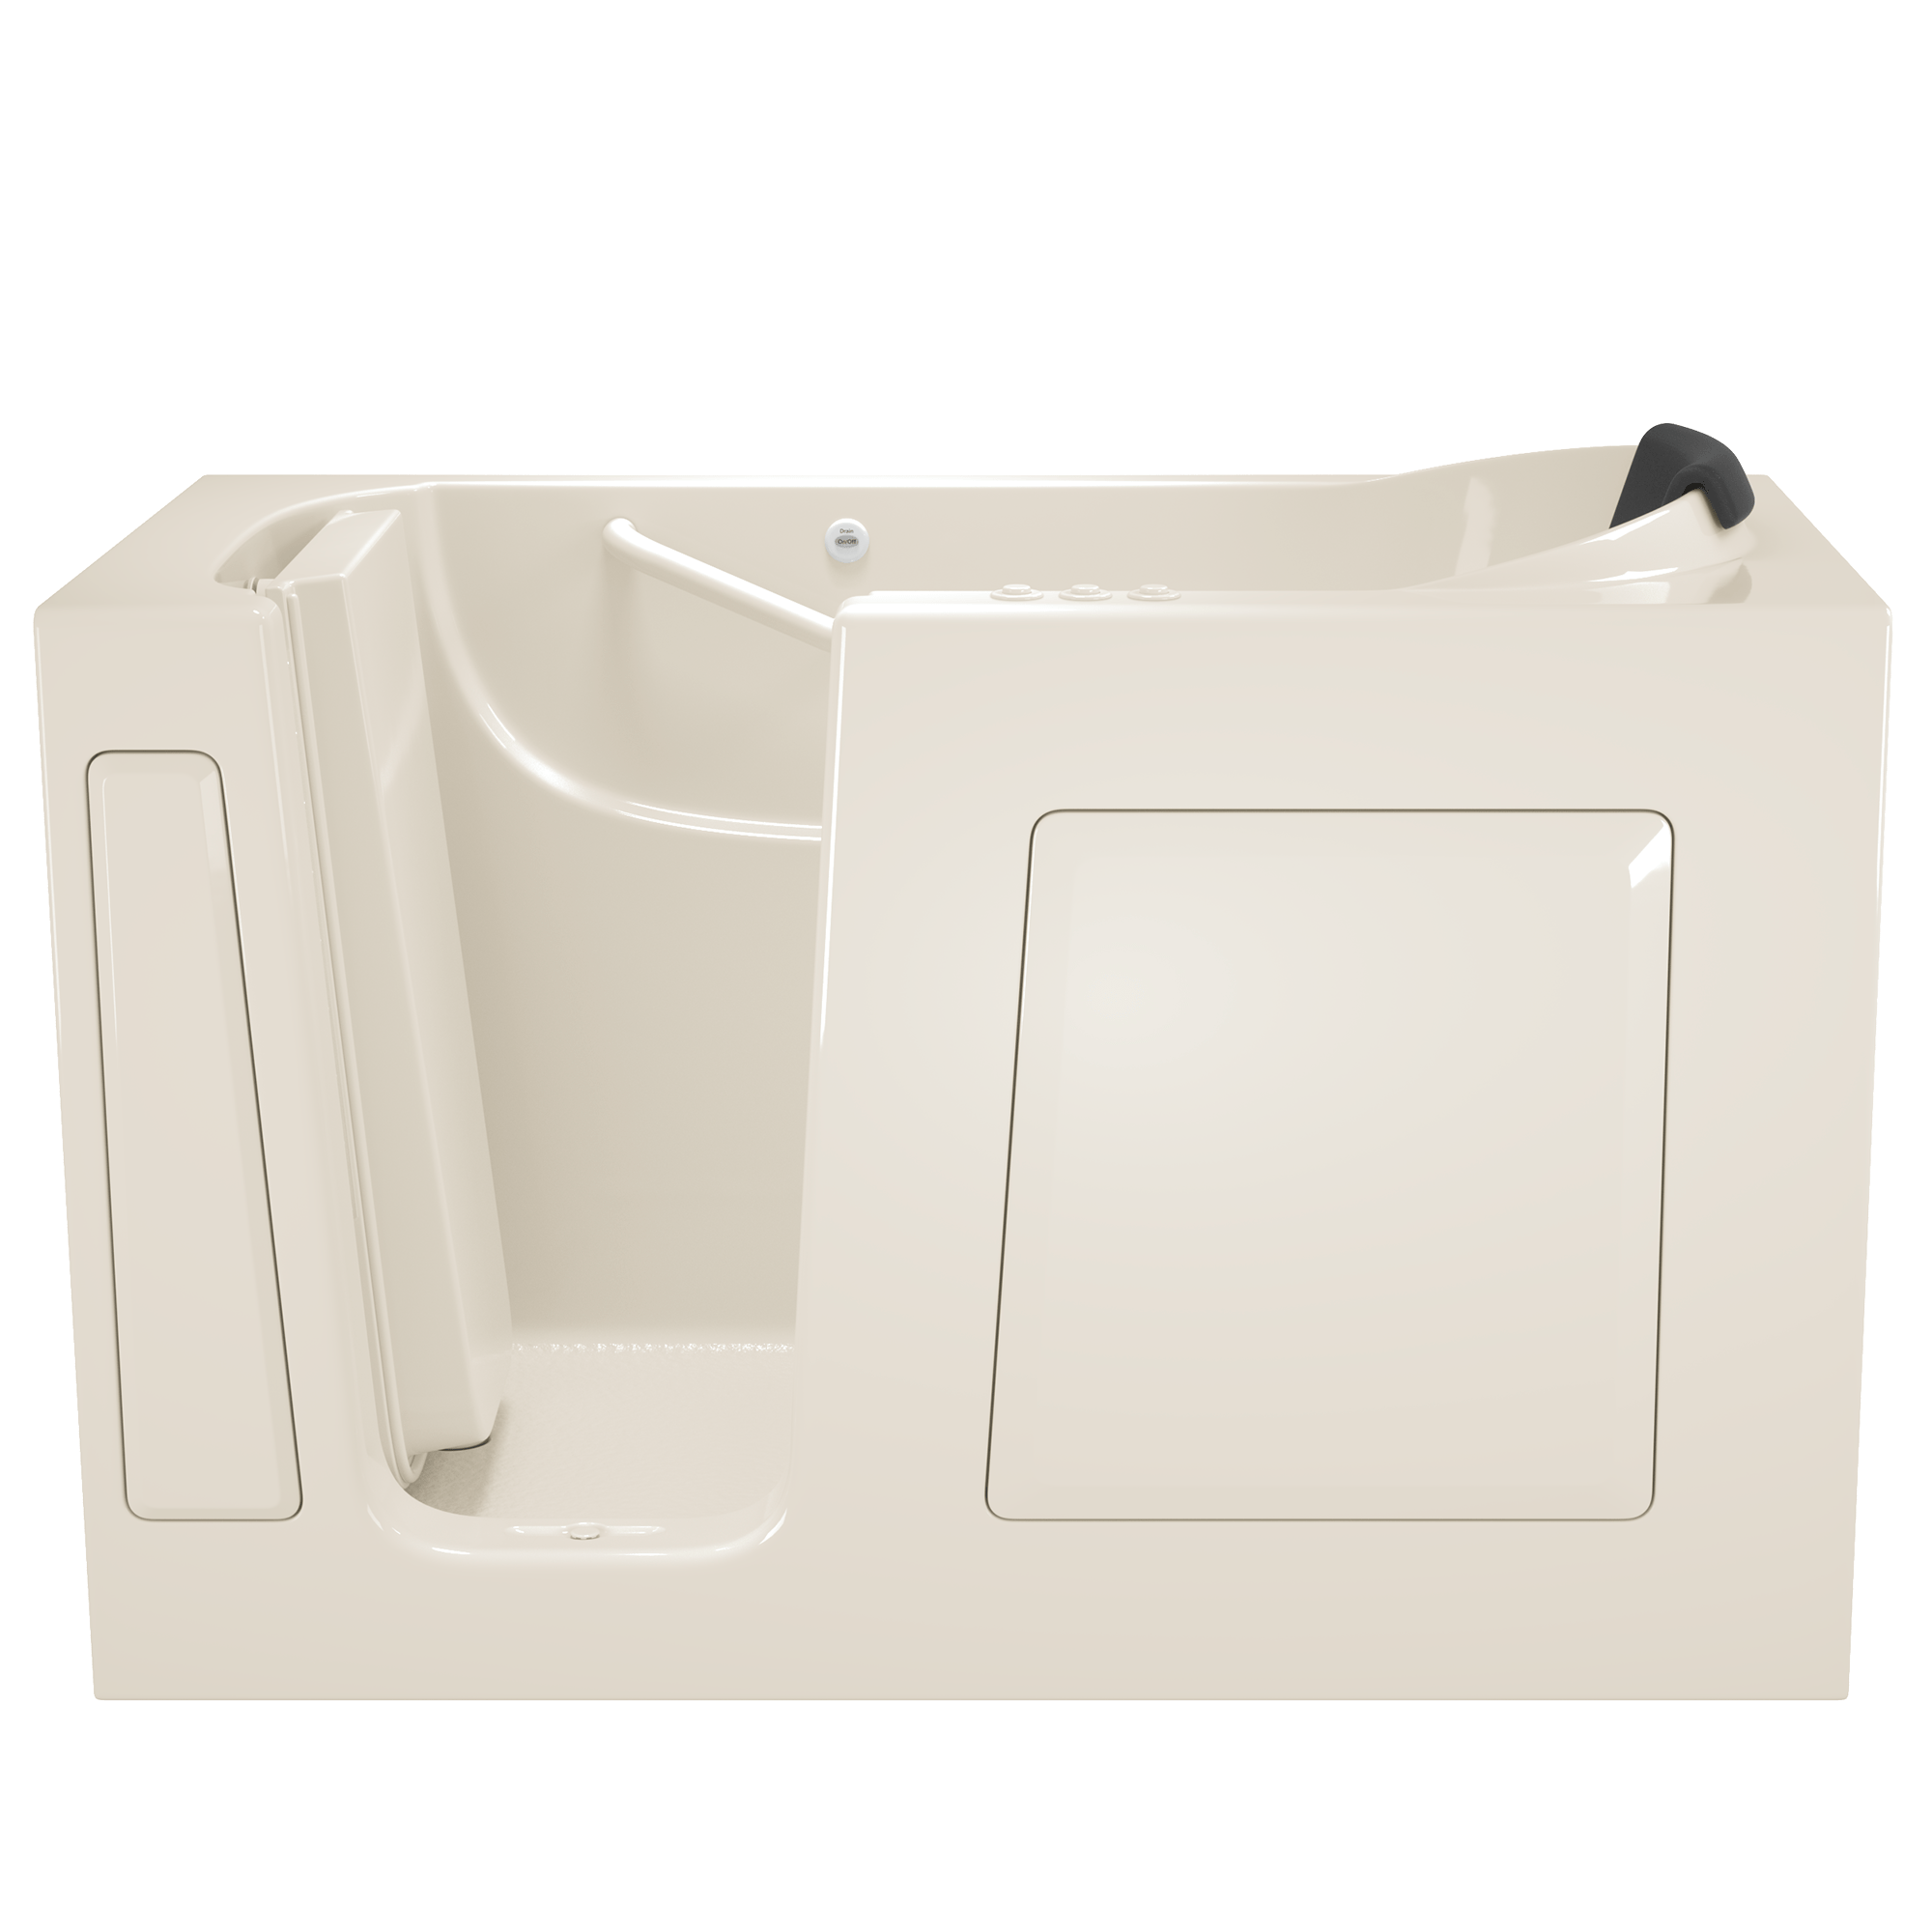 Gelcoat Premium Series 30 x 60  Inch Walk in Tub With Combination Air Spa and Whirlpool Systems   Left Hand Drain WIB LINEN